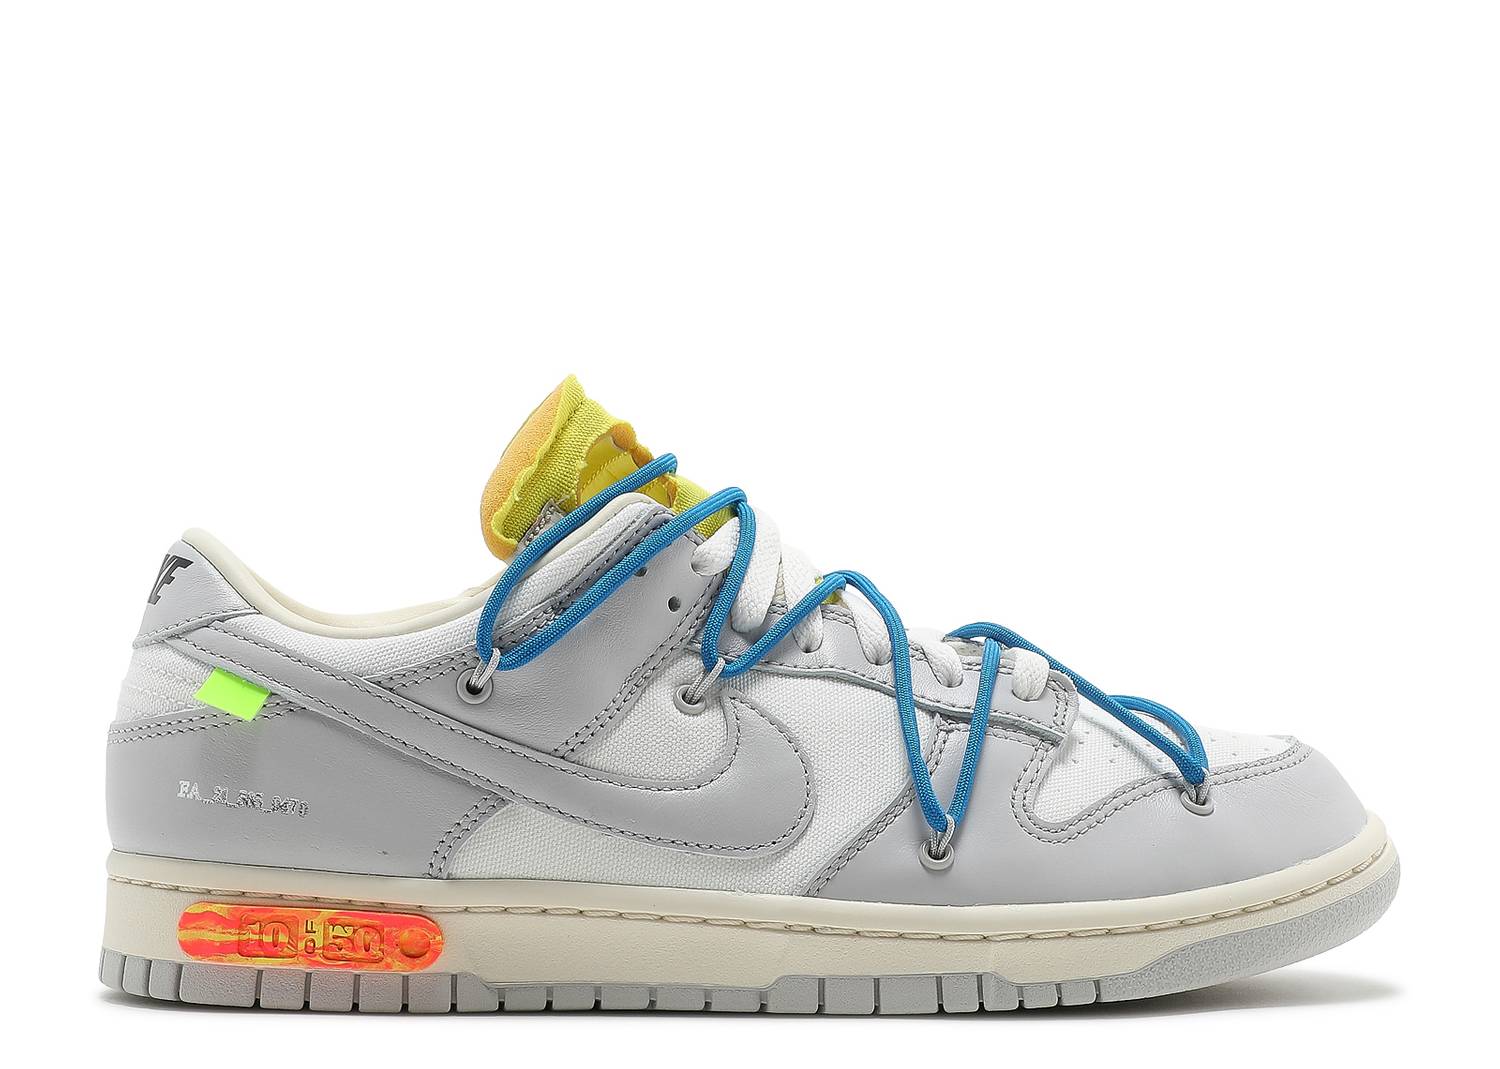 NIKE DUNK LOW X OFF-WHITE “LOT 10”